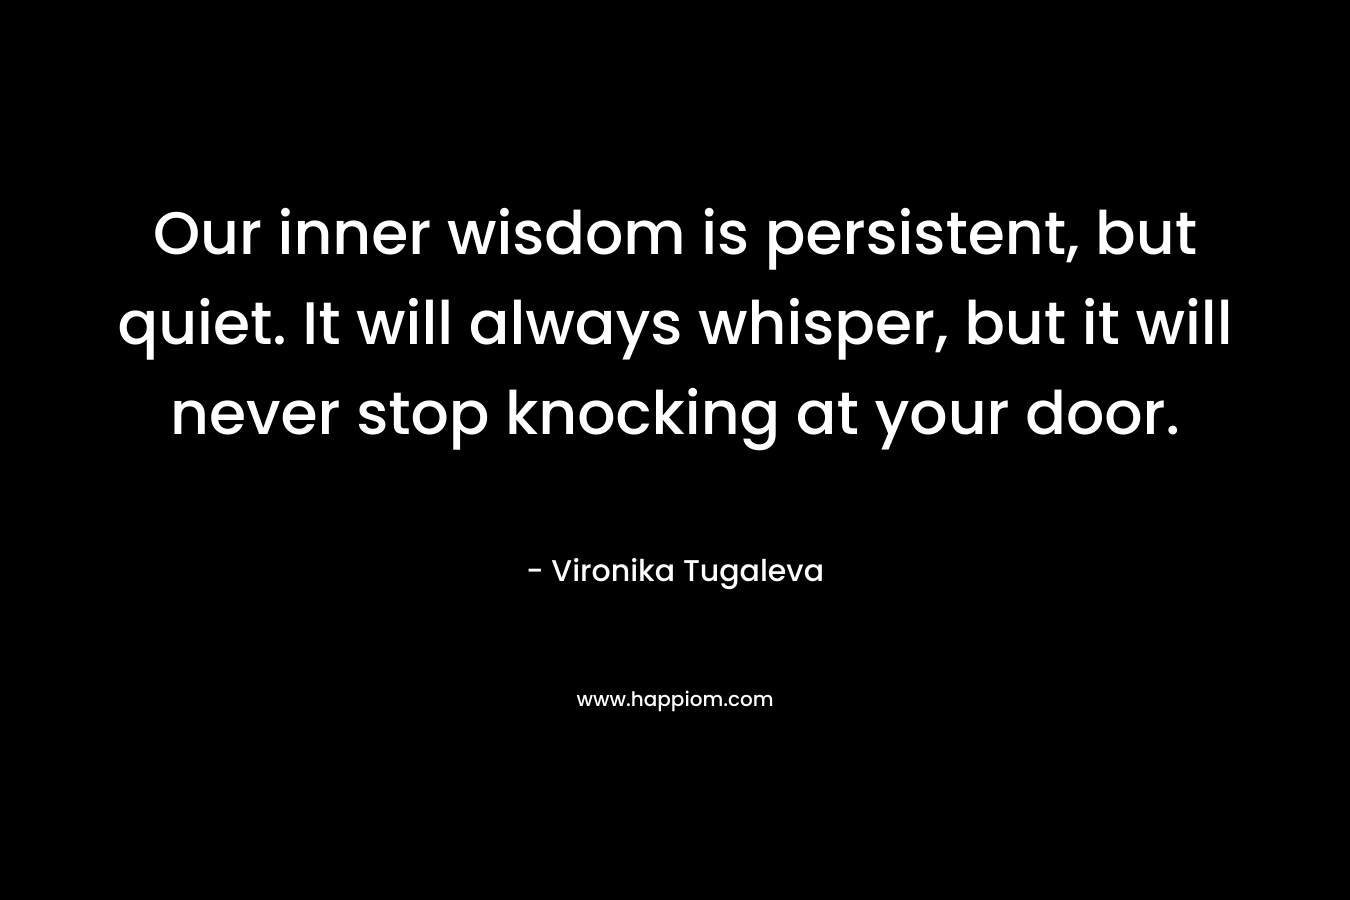 Our inner wisdom is persistent, but quiet. It will always whisper, but it will never stop knocking at your door.